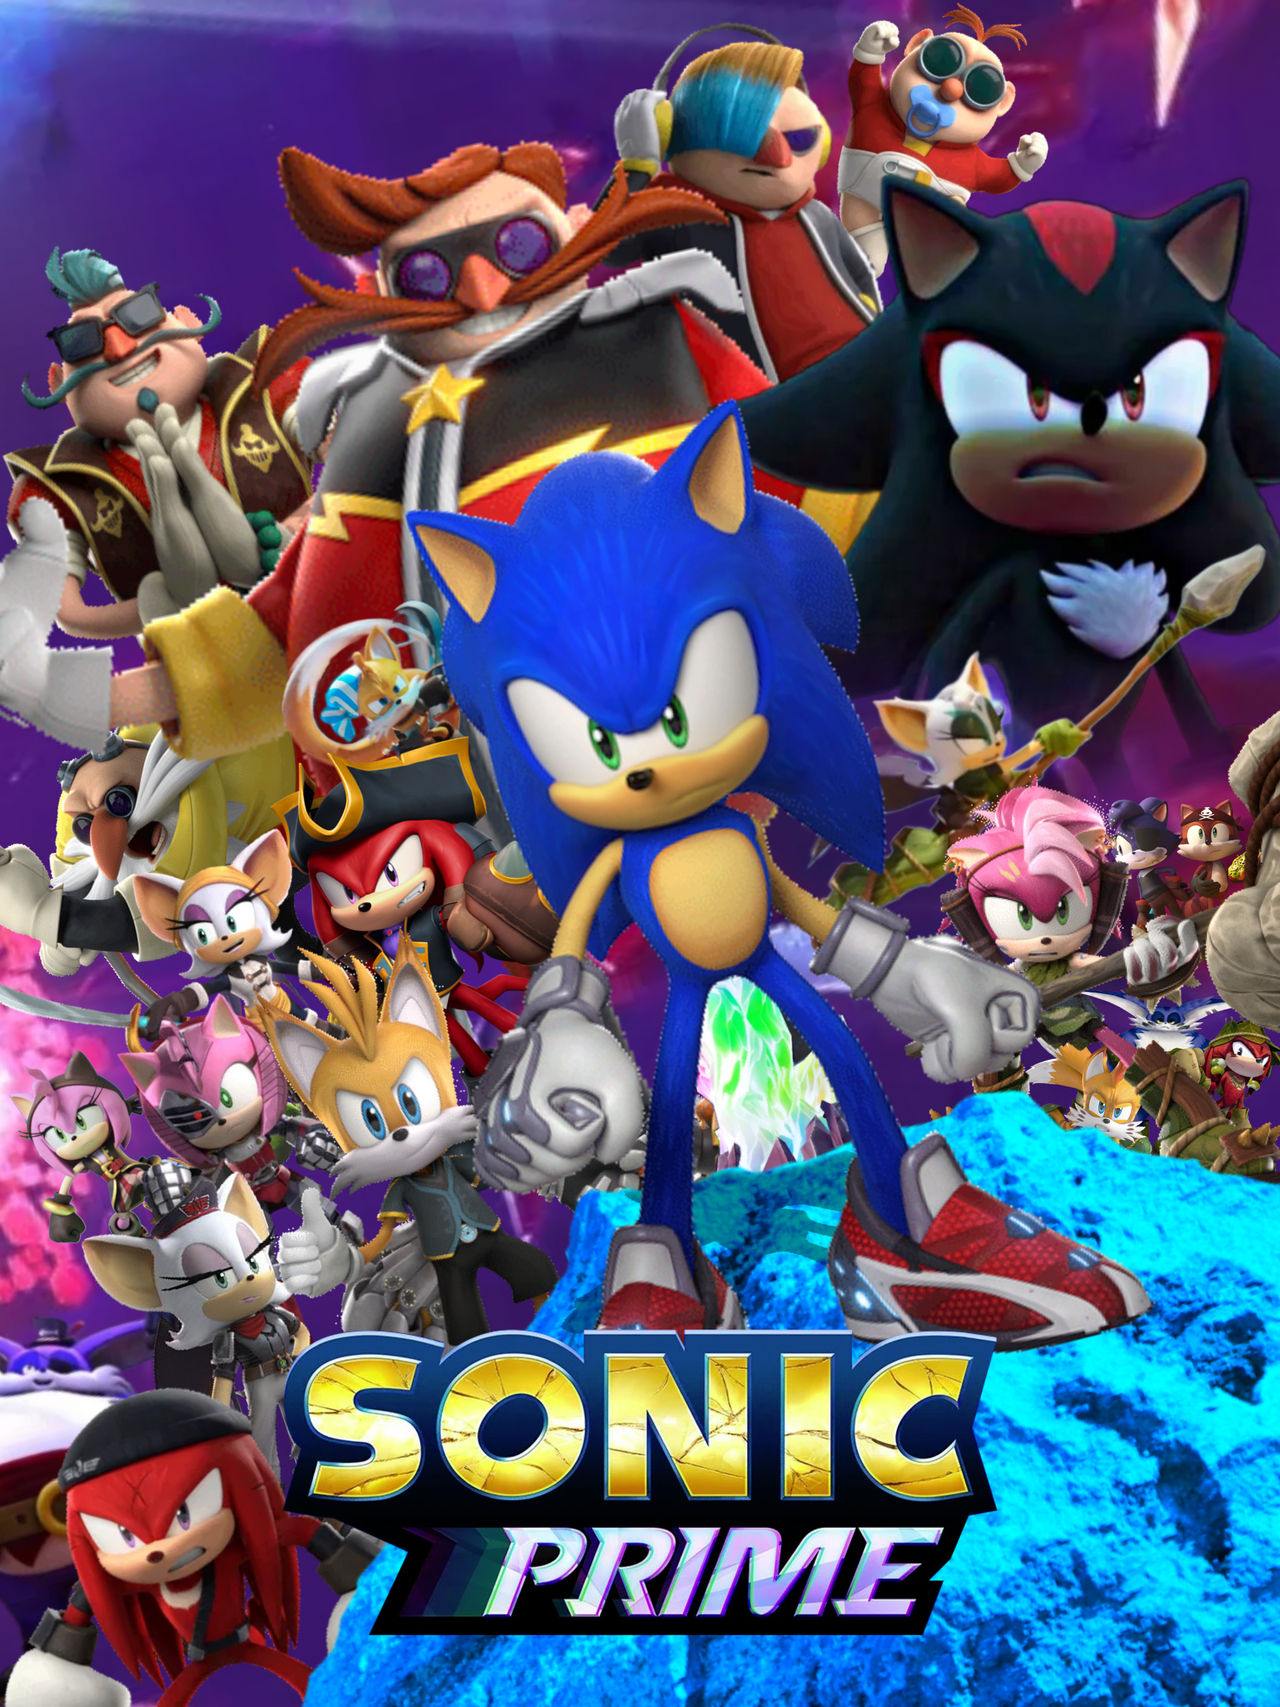 Sonic Frontiers 2 - Concept Poster by heybolol on DeviantArt